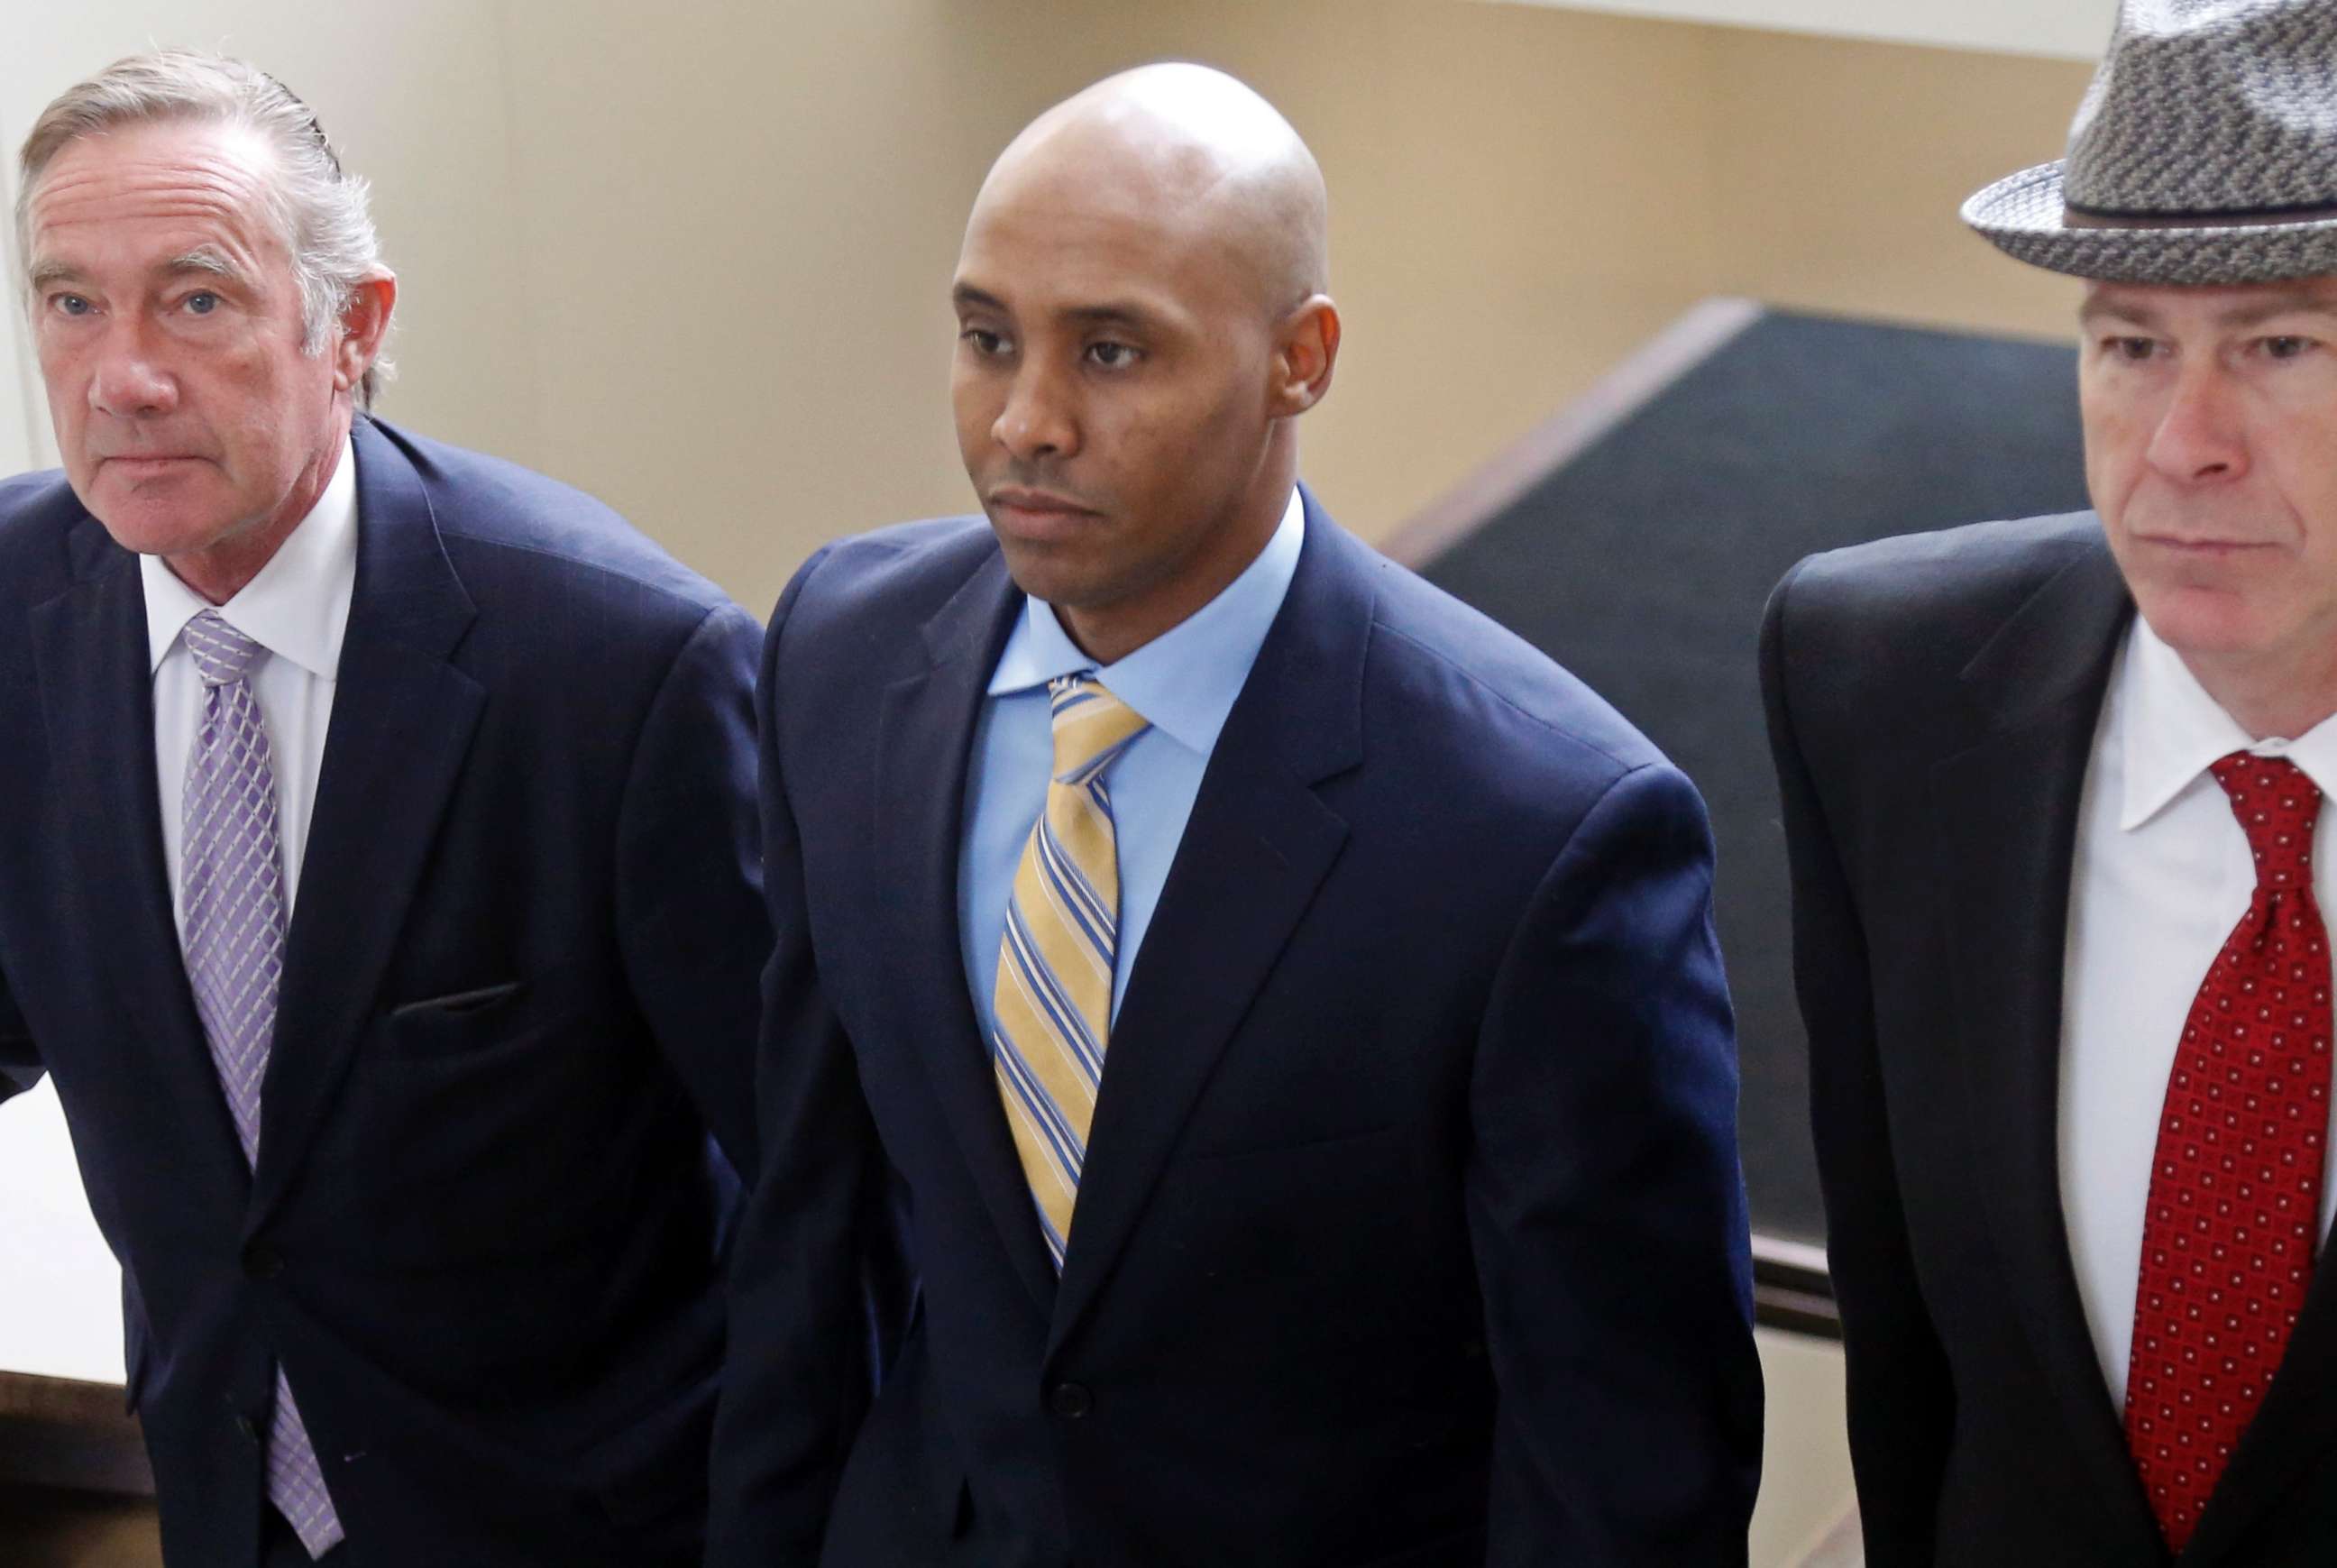 PHOTO: Mohamed Noor arrives with his legal team at the Hennepin County Government Center for a hearing, May 8, 2018, in Minneapolis.